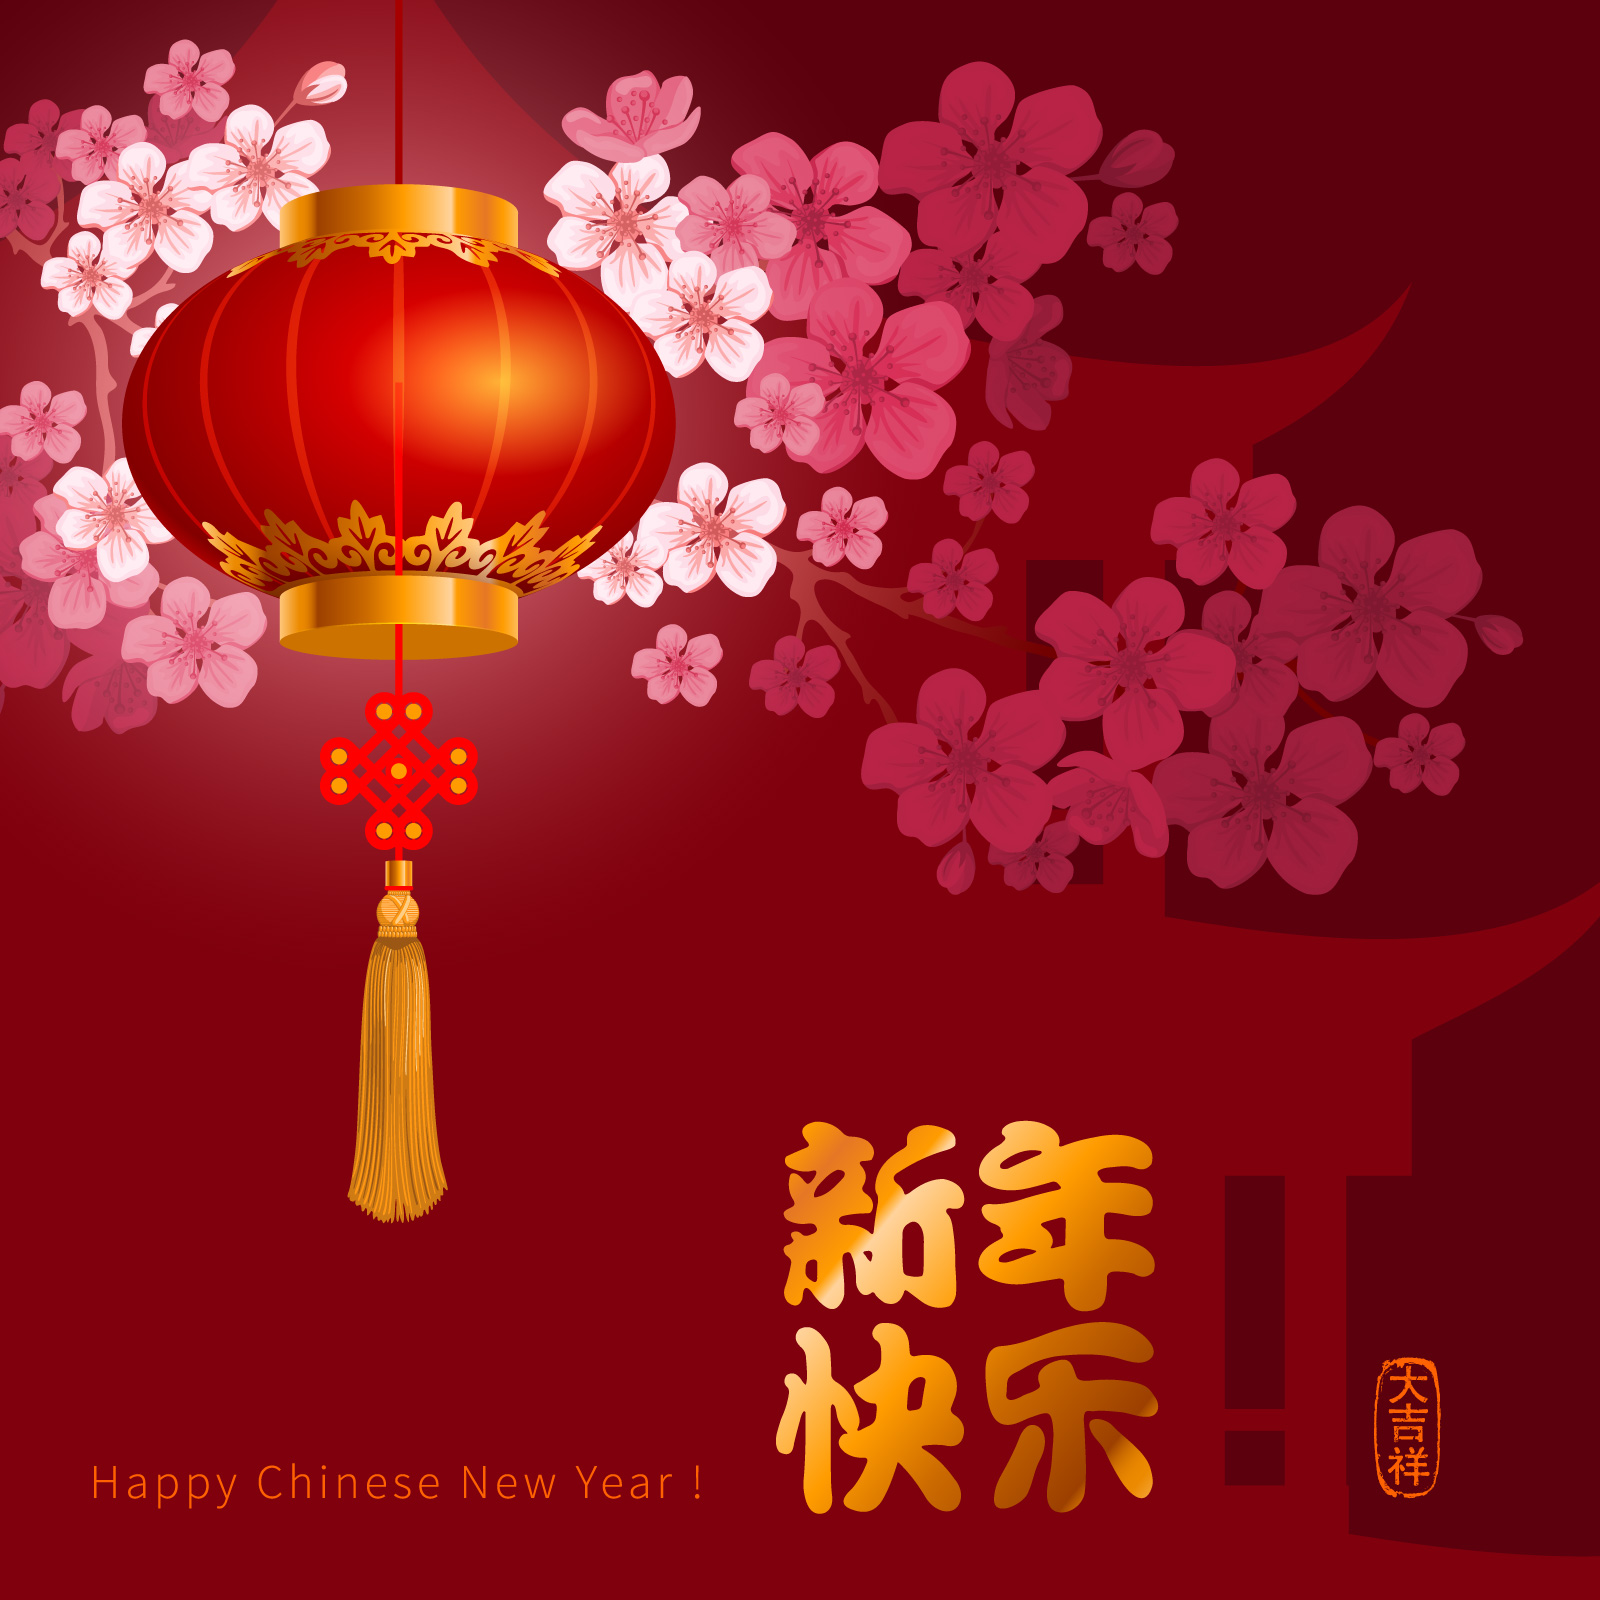 China Oriental cherry and red lanterns - Illustrations Vectors Free Download ESP